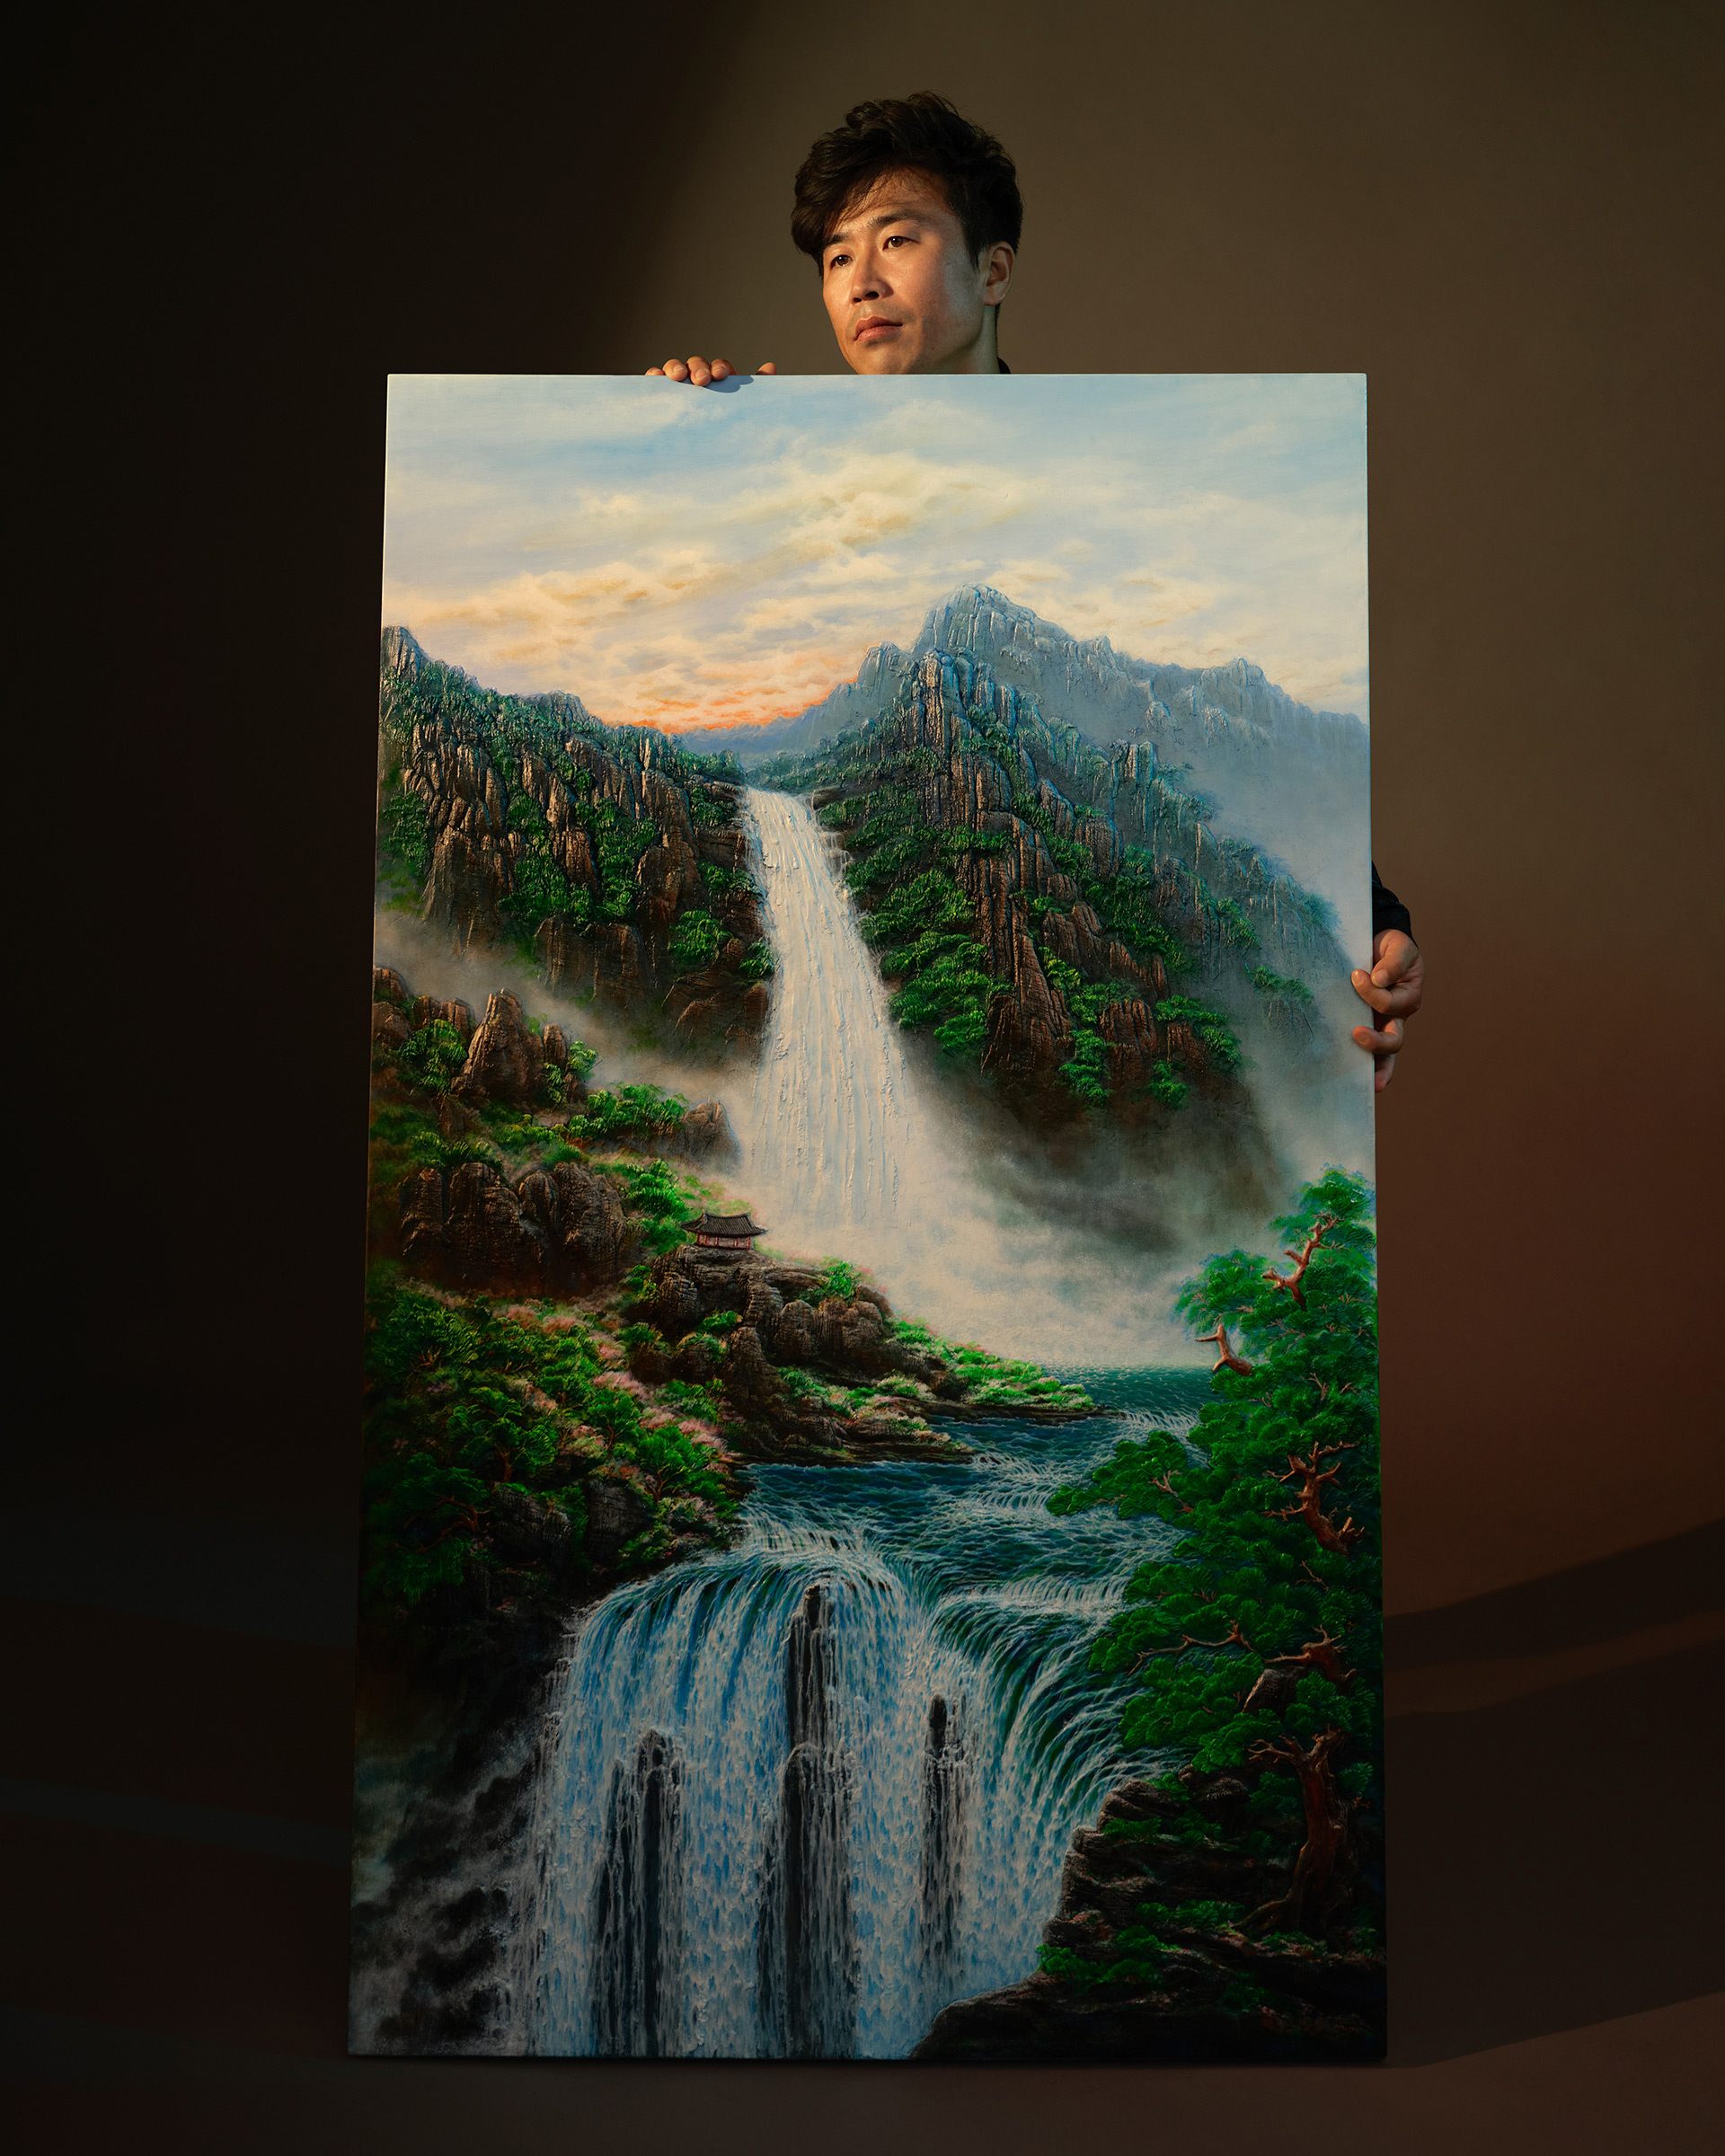 <strong>Artist Surl Lee, photographed alongside his artwork.</strong> "<a href="https://time.com/6215661/north-korea-community-london/">A Vibrant North Korean Community in London Finds Its Days Are Numbered,</a>" September 28. (Catherine Hyland for TIME)